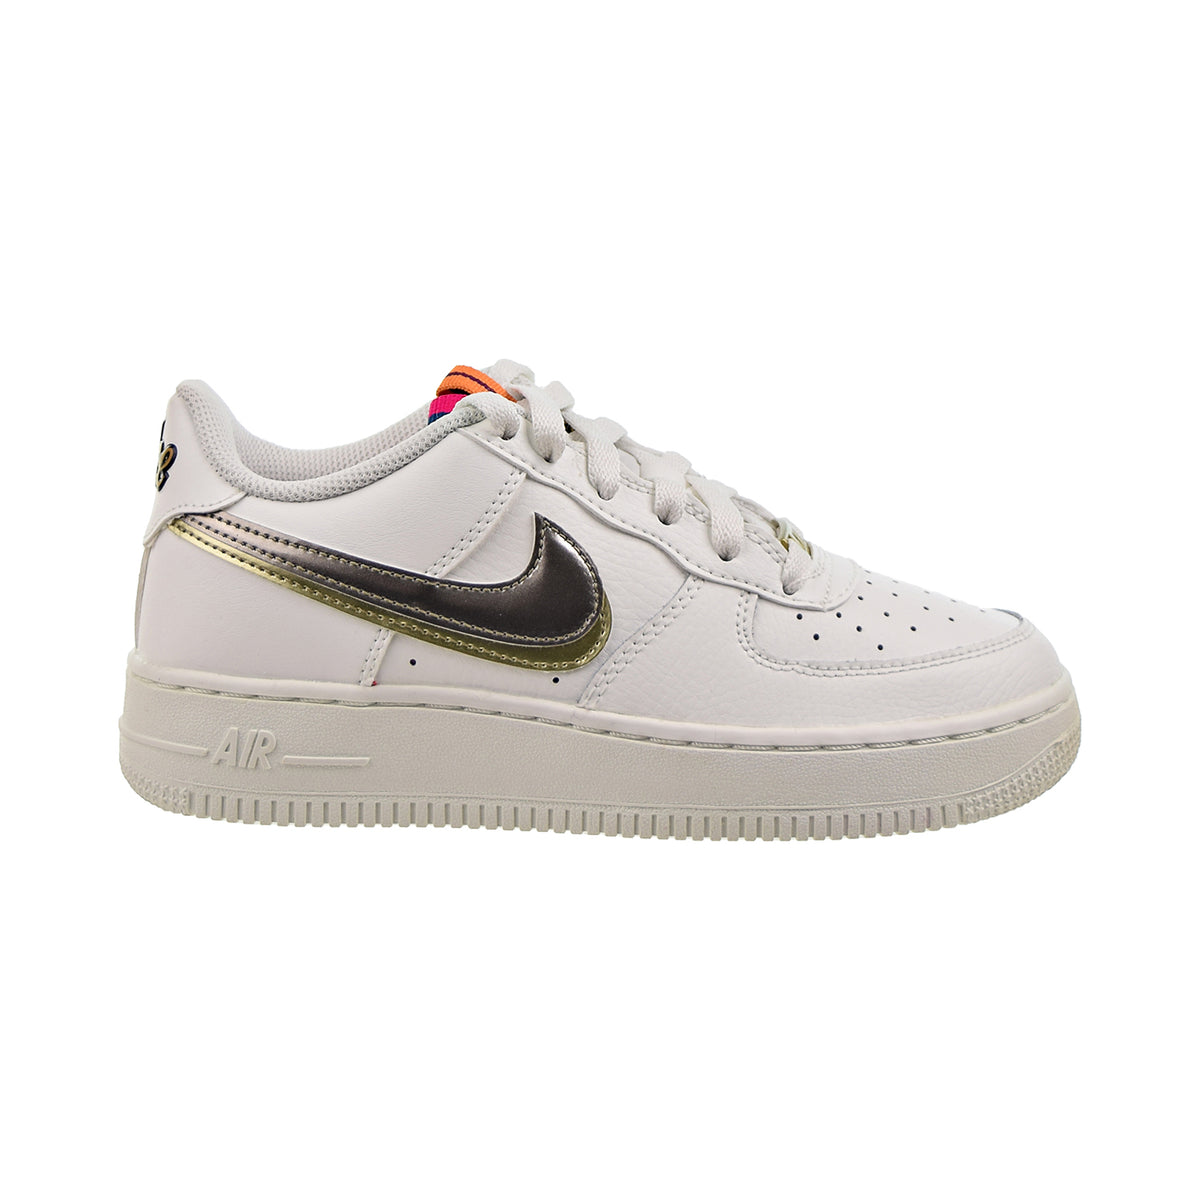 Nike Airforce One LV8 GS What The 90's Kids Purple Orange